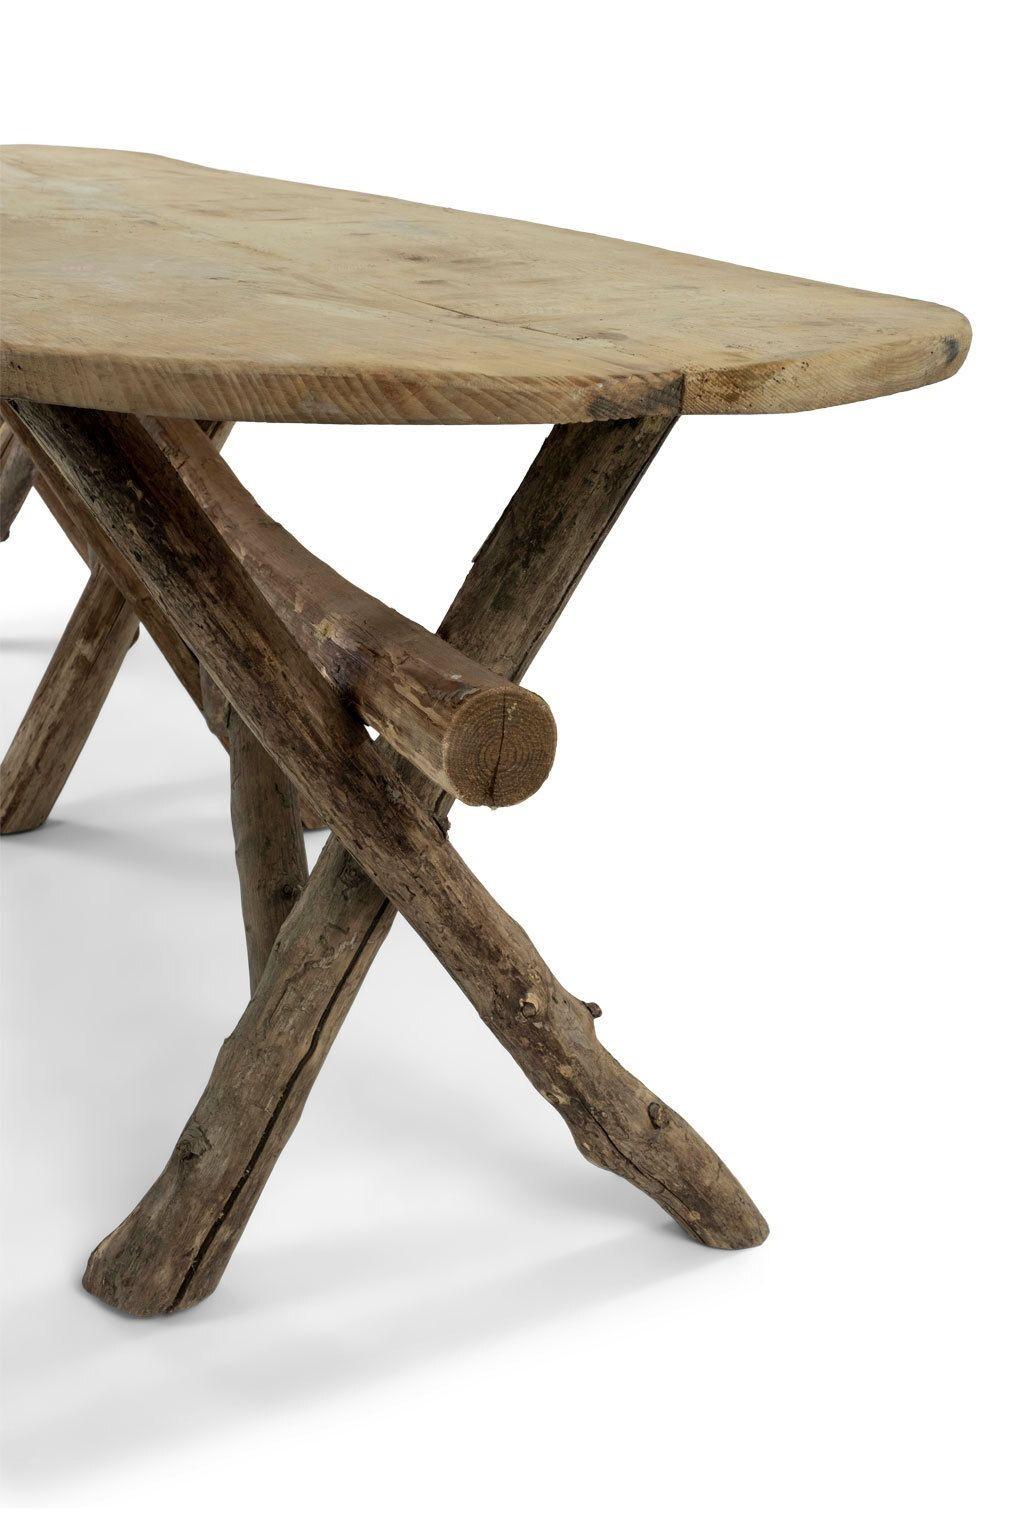 Rustic Long Live-Edge Oval Top Table with Natural Shaped Trestle Base For Sale